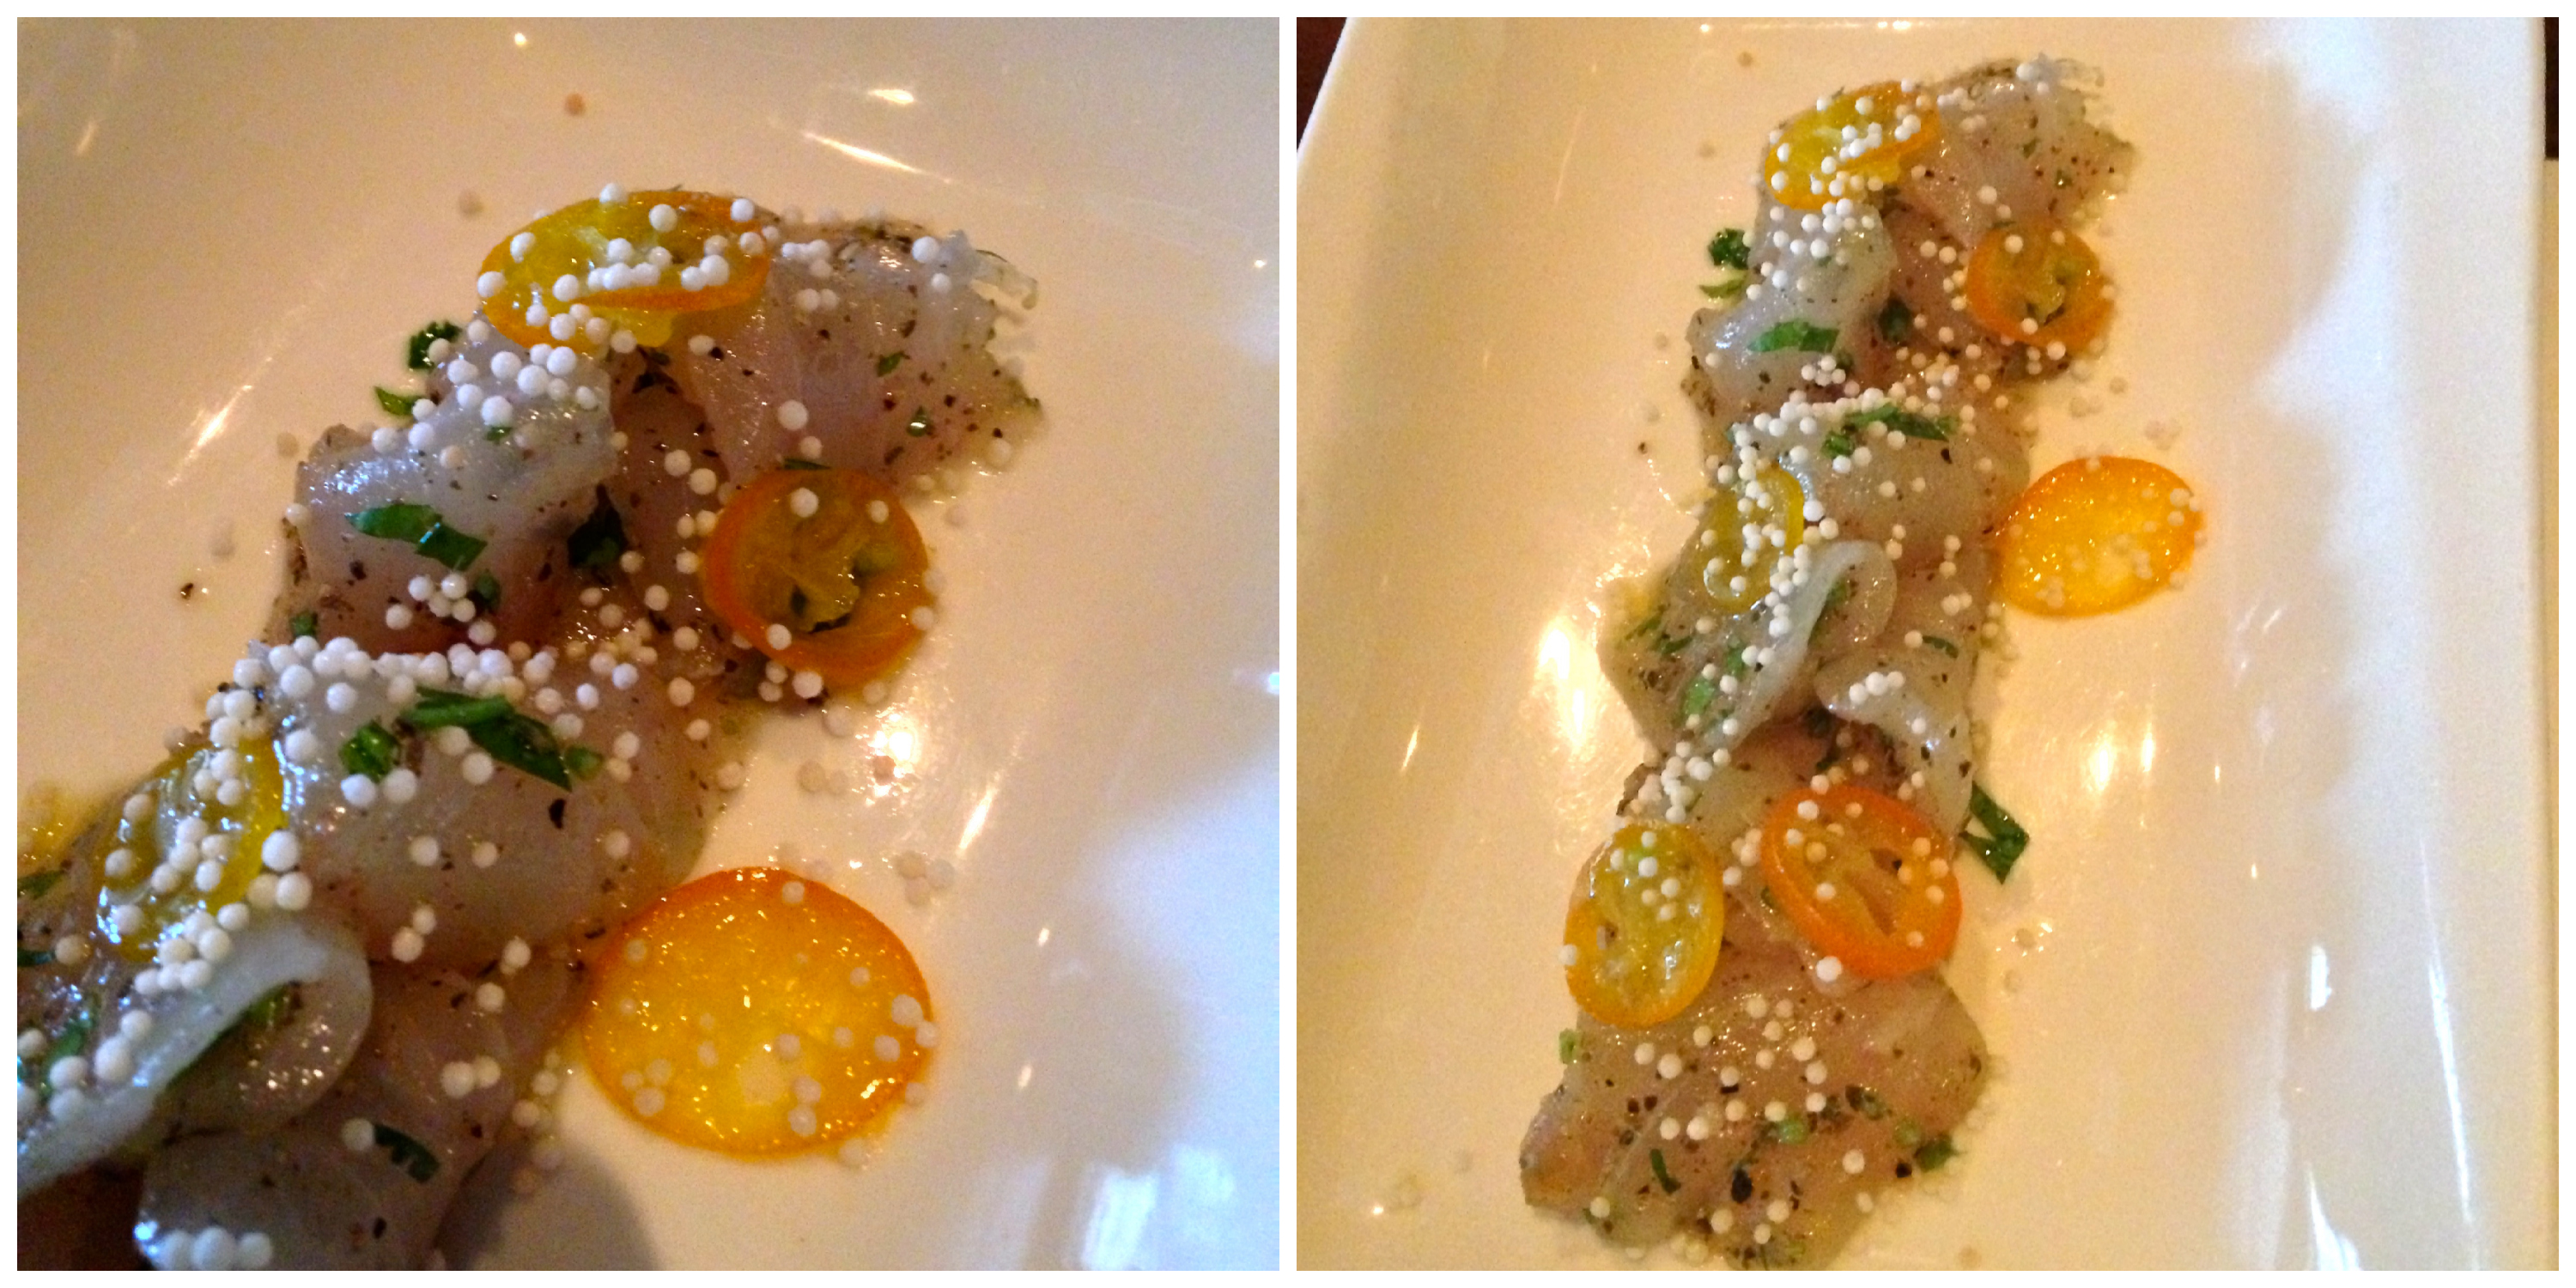 Striped Bass Crudo topped with peppercorns and kumquats